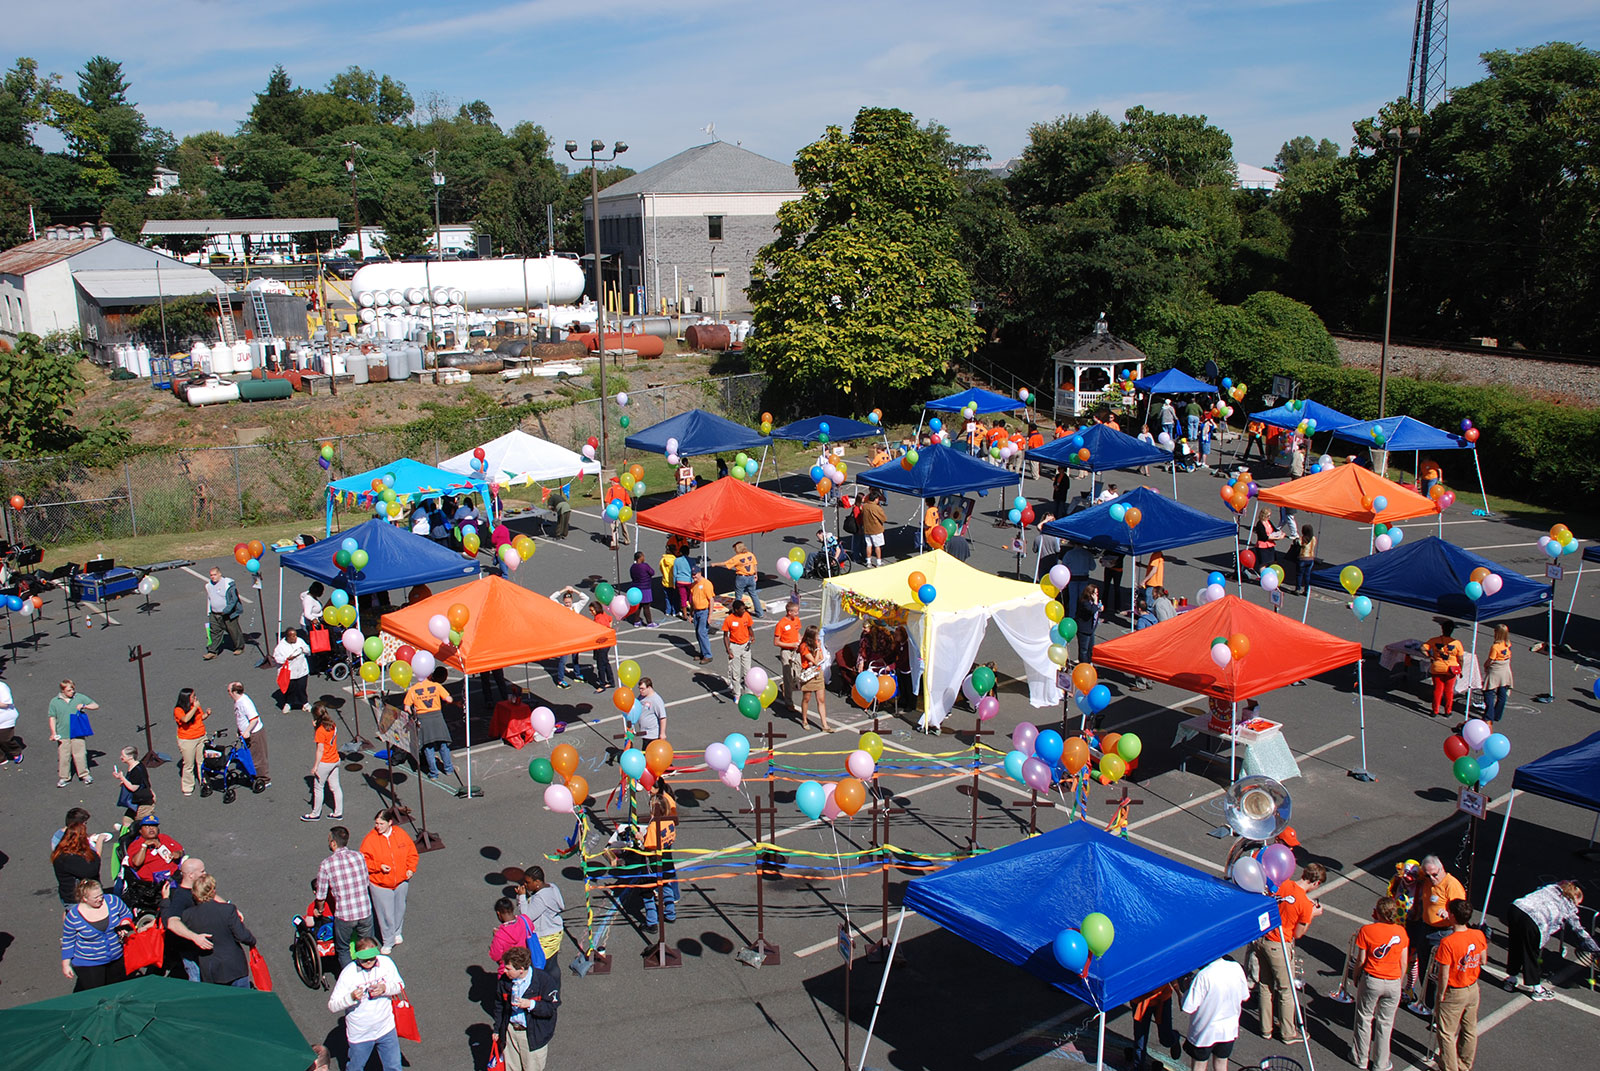 Aerial photo of Day of Caring carnival